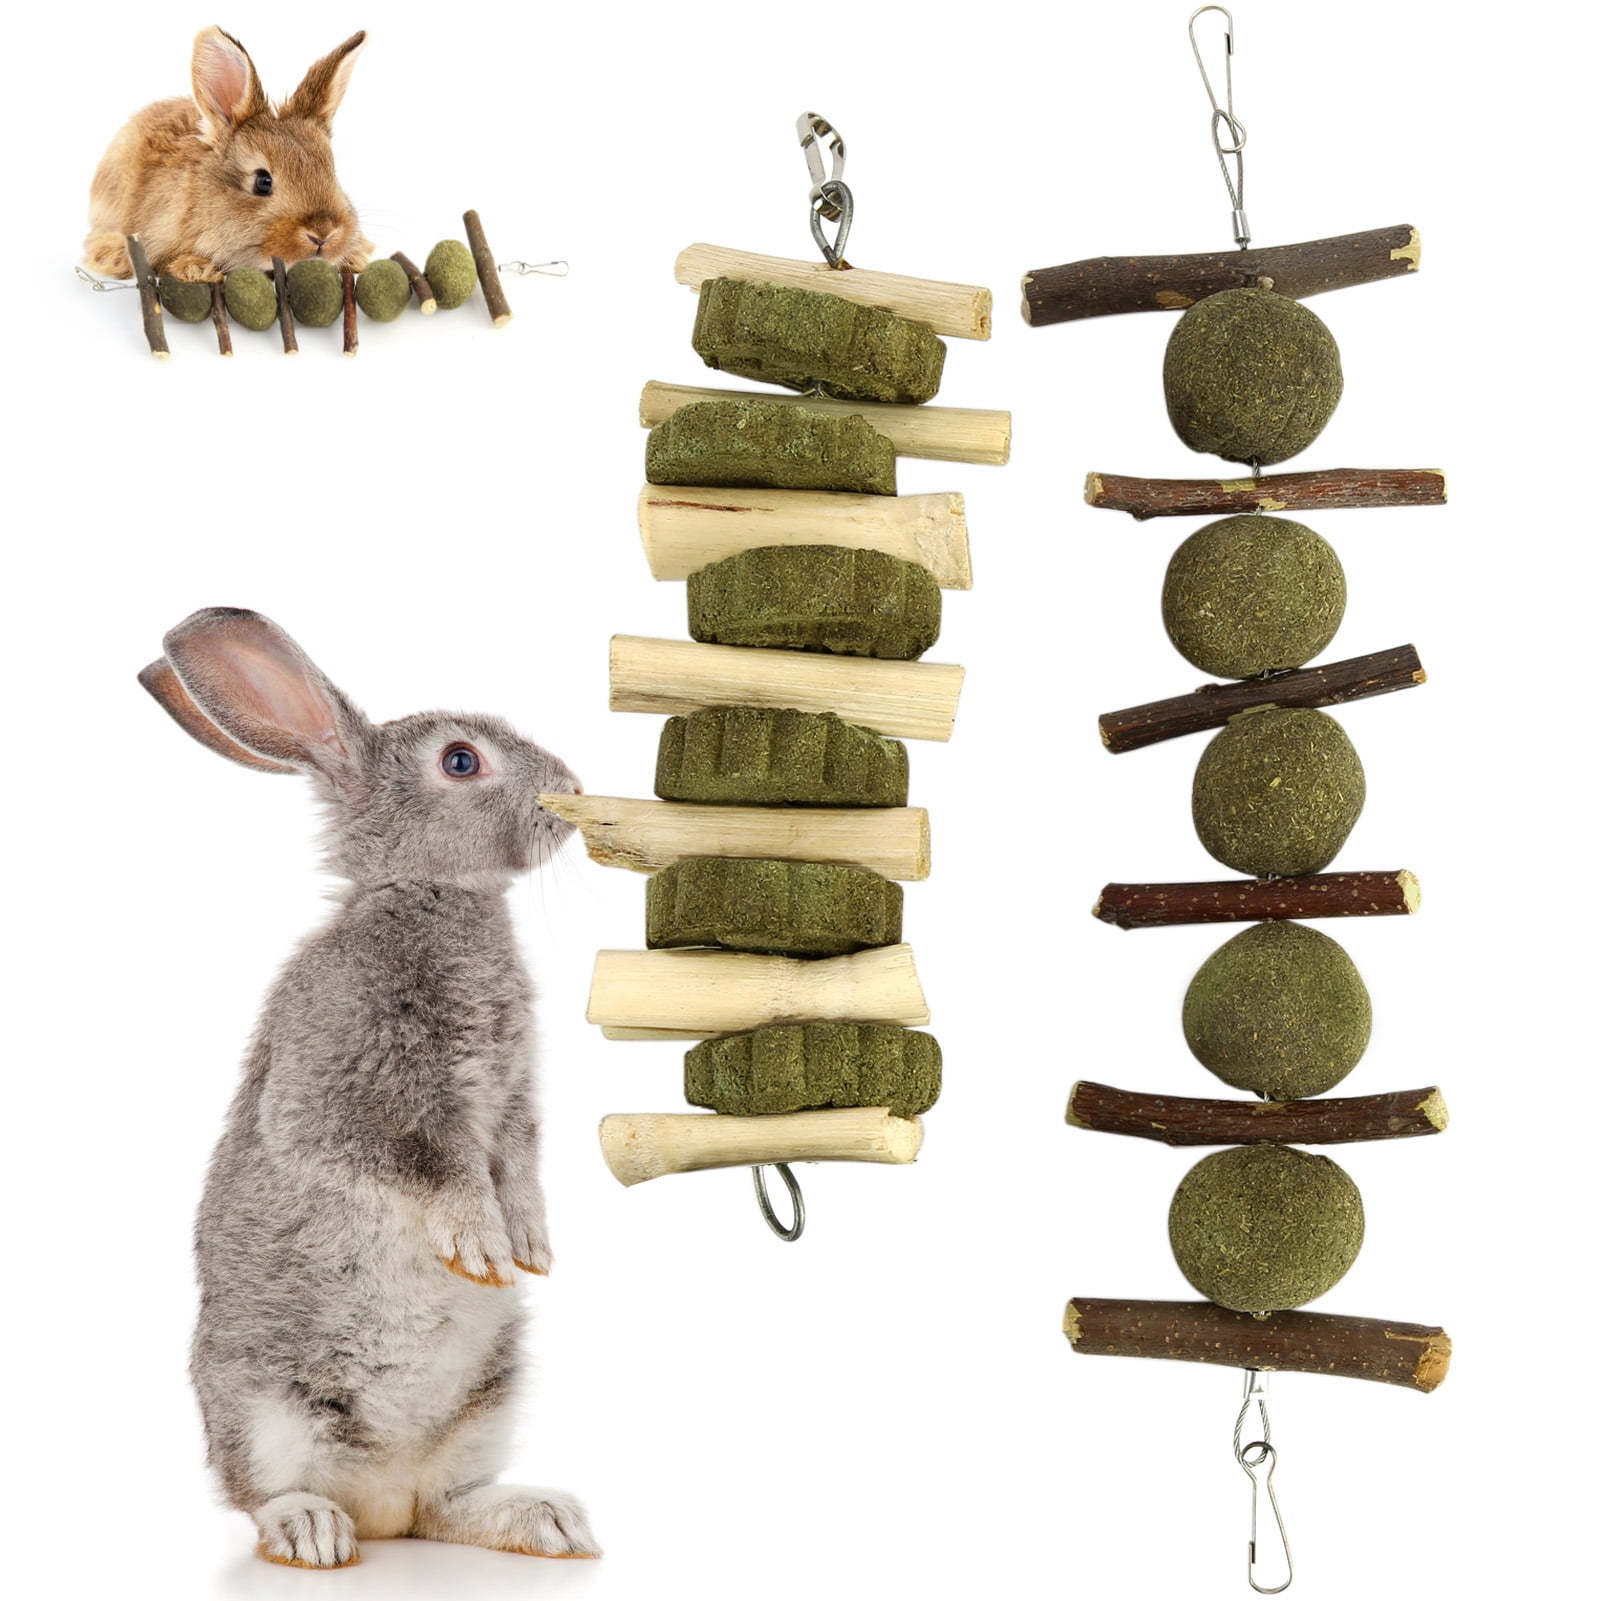 Hamsters Chinchillas Apple Sticks Pet Chew Toy for Rabbits limewie 2 Pack Bunny Chew Toys for Teeth Chewing or Playing